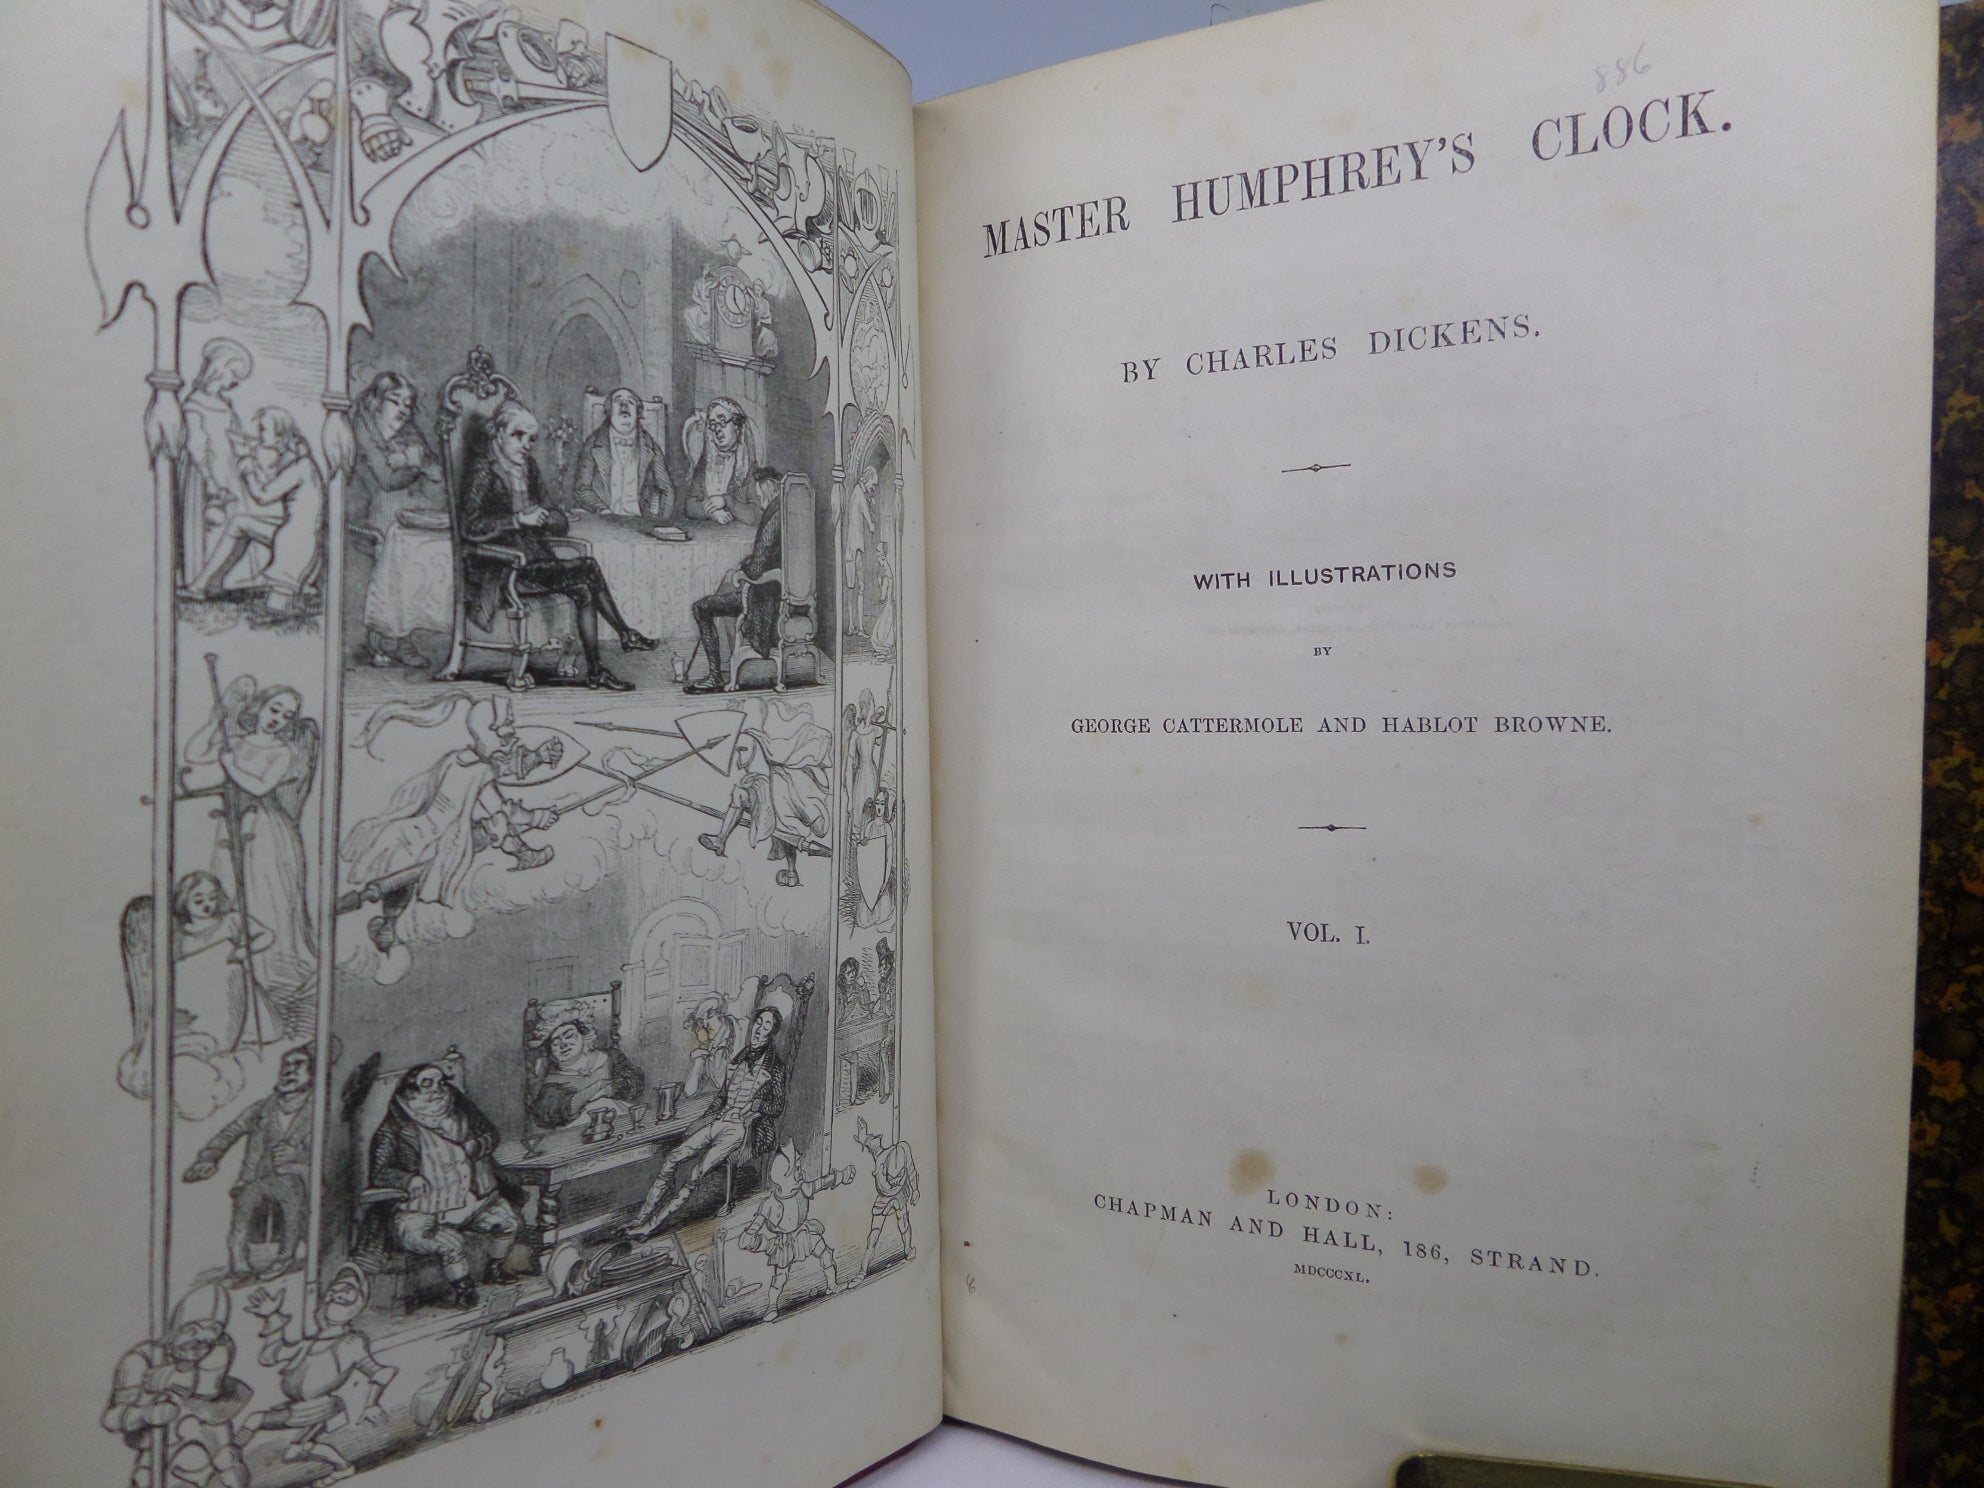 MASTER HUMPHREY'S CLOCK BY CHARLES DICKENS 1840-41 LEATHER BOUND FIRST EDITION